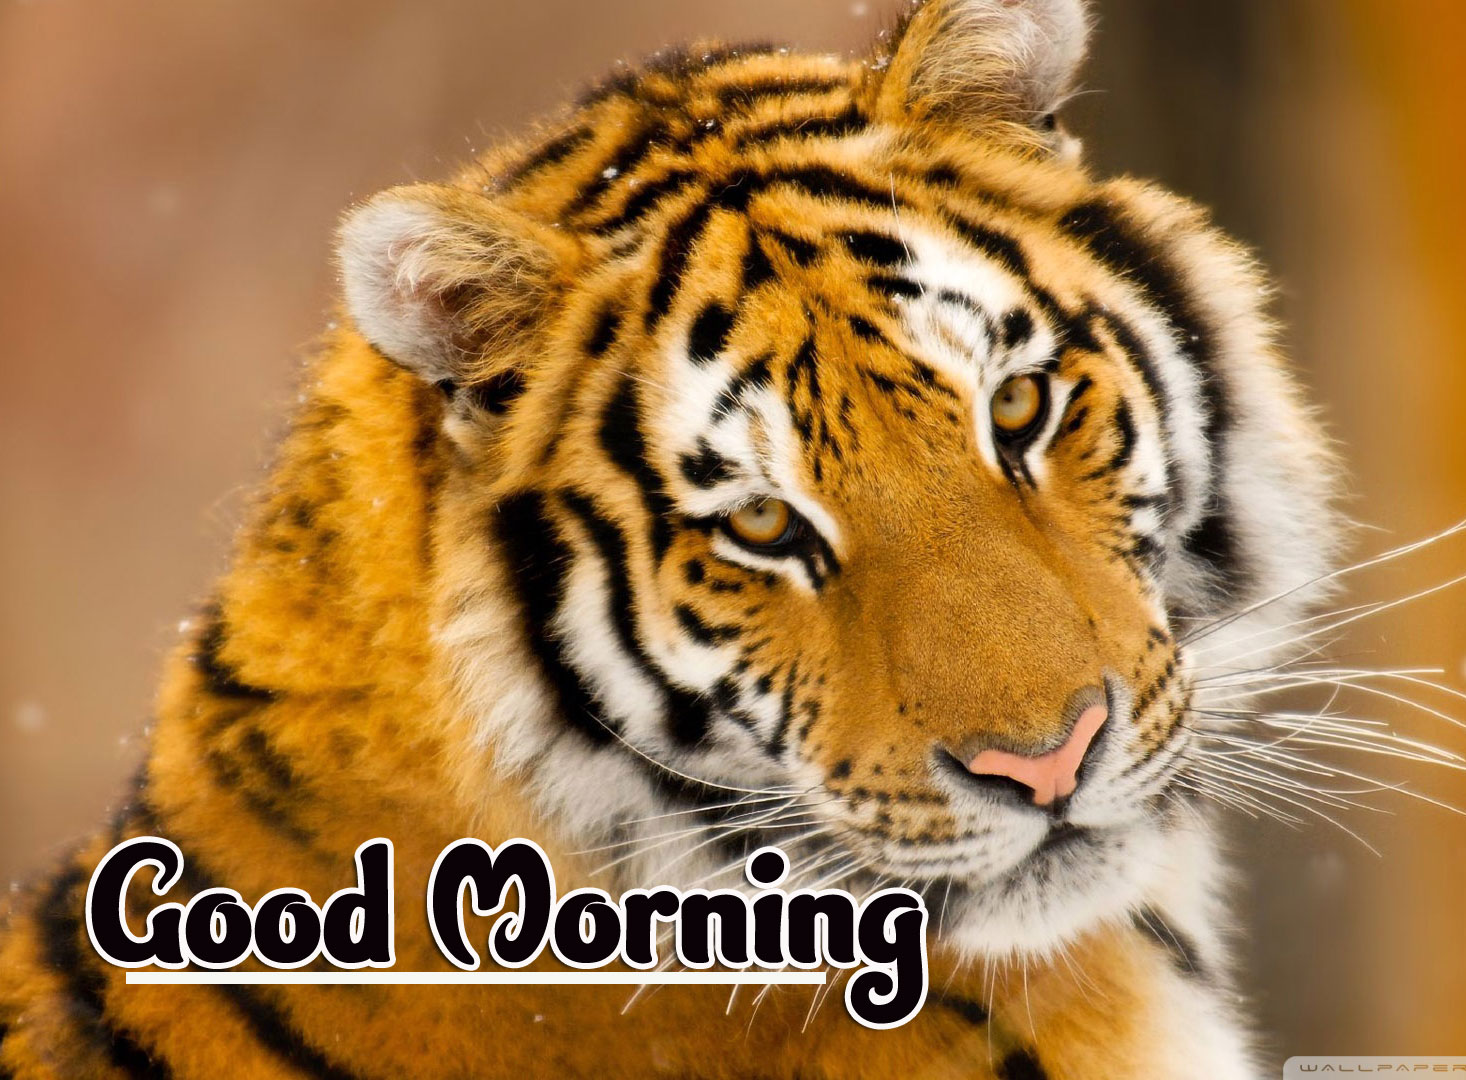 Animal Good morning Wishes Images Pics Download 